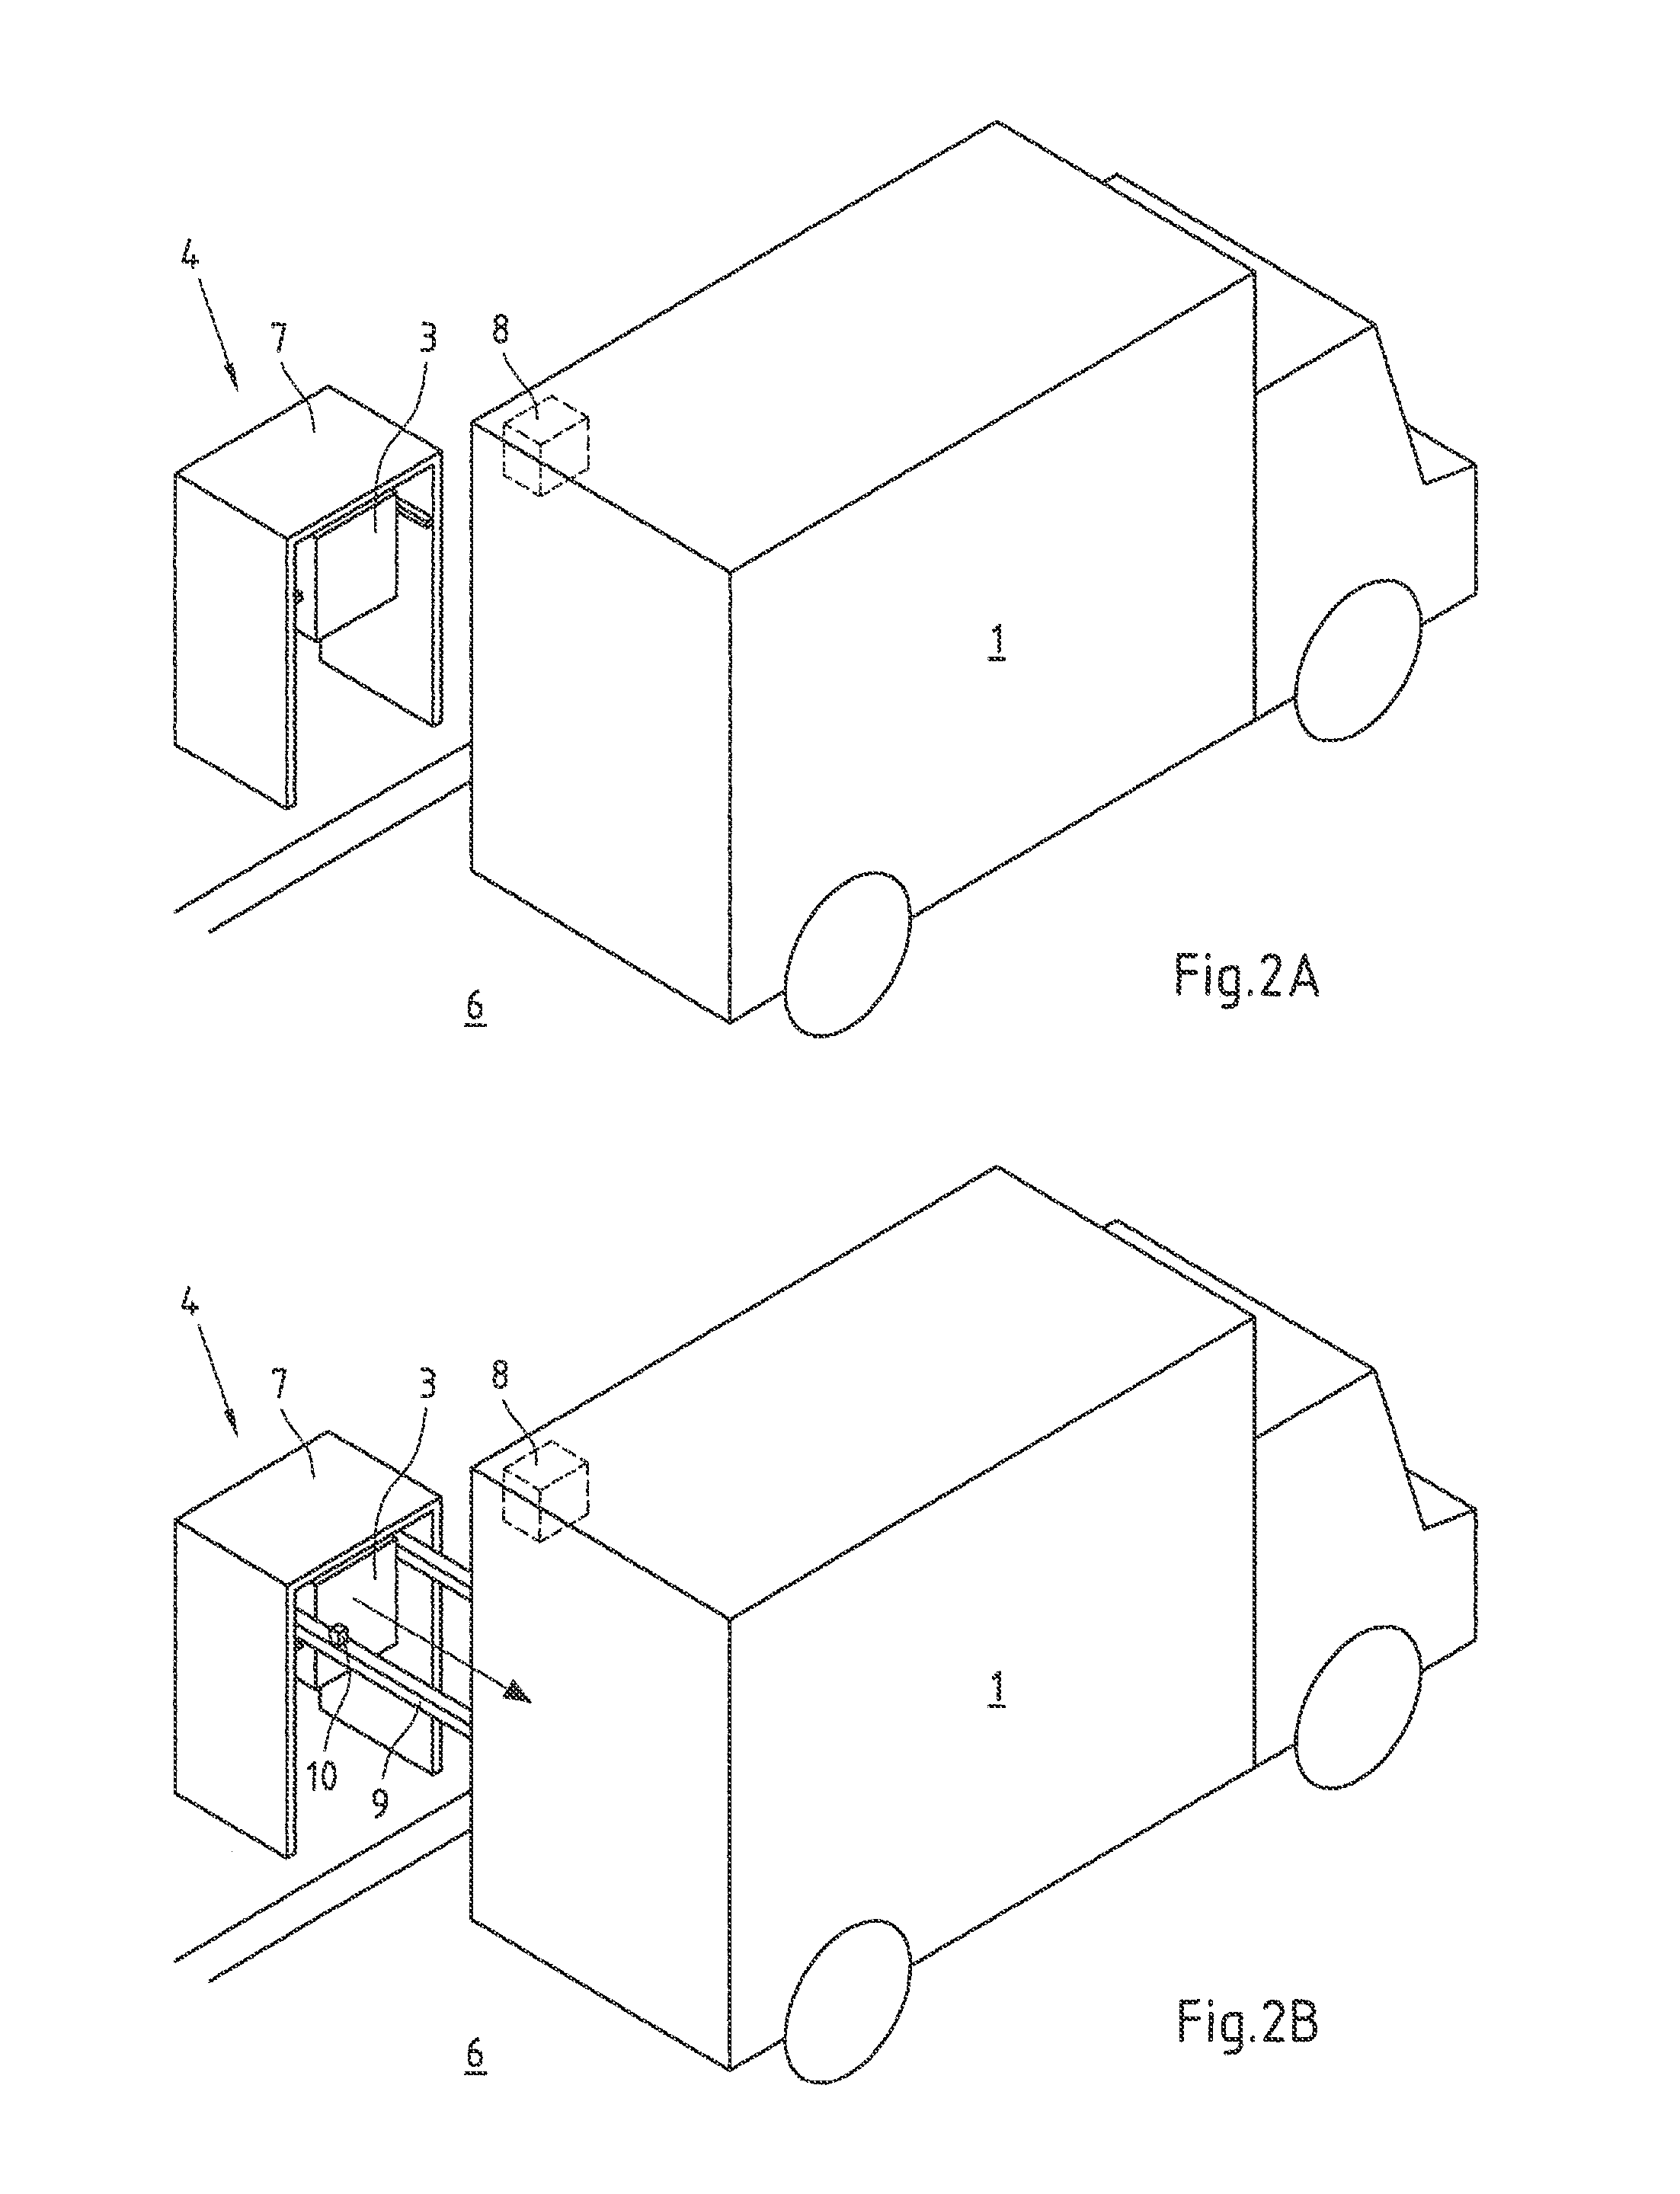 Method for delivery and/or collection of at least one mailing